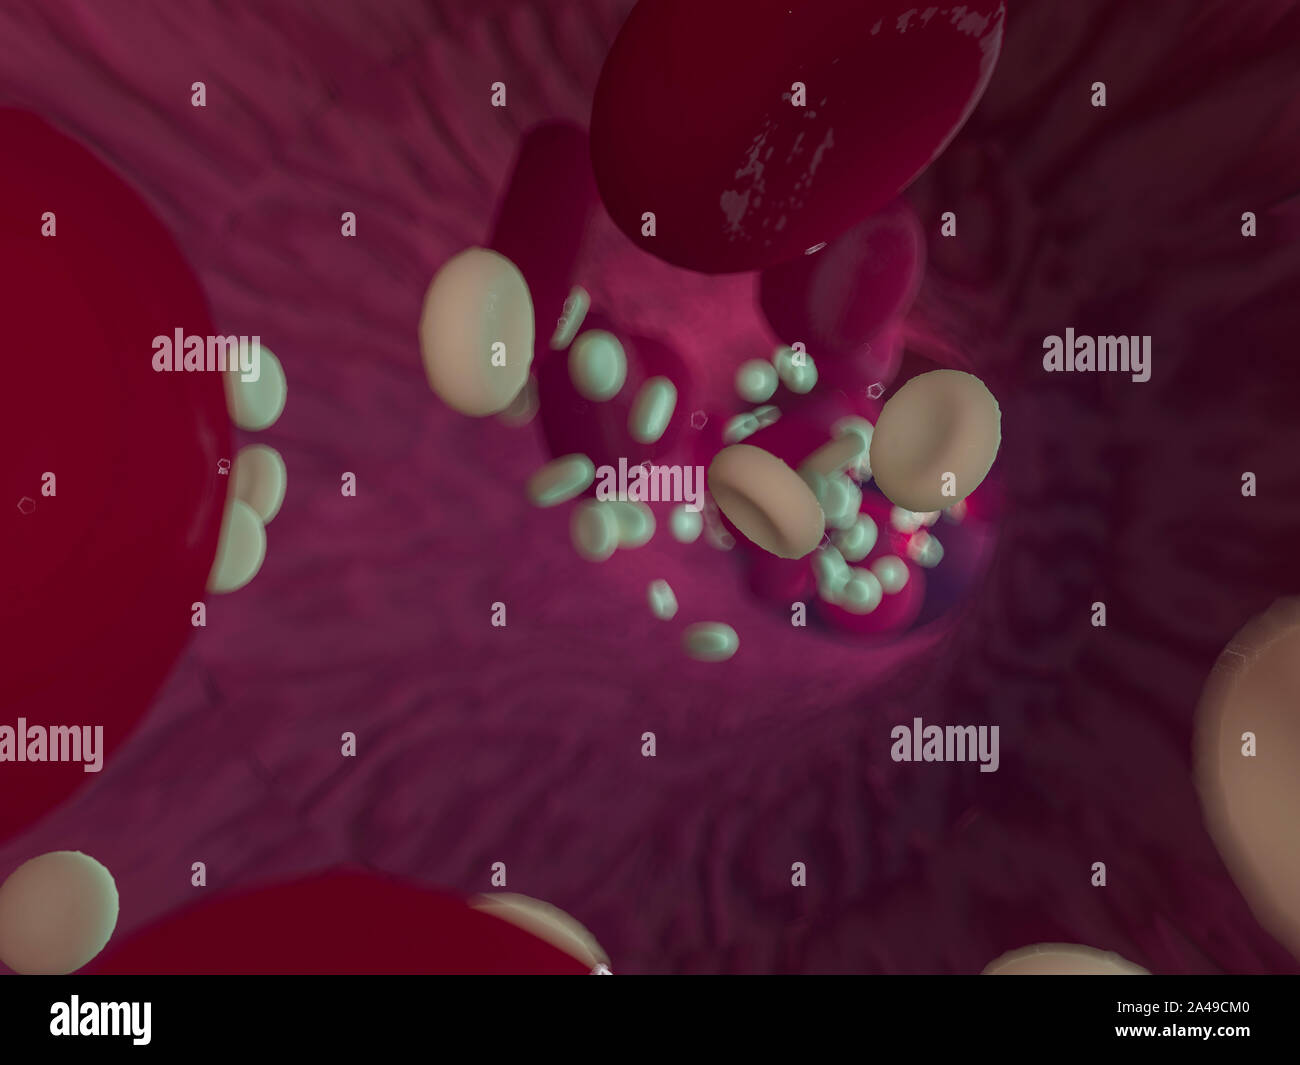 Red blood cells. Scientific illustration bloodstream. 3D rebdering Stock Photo